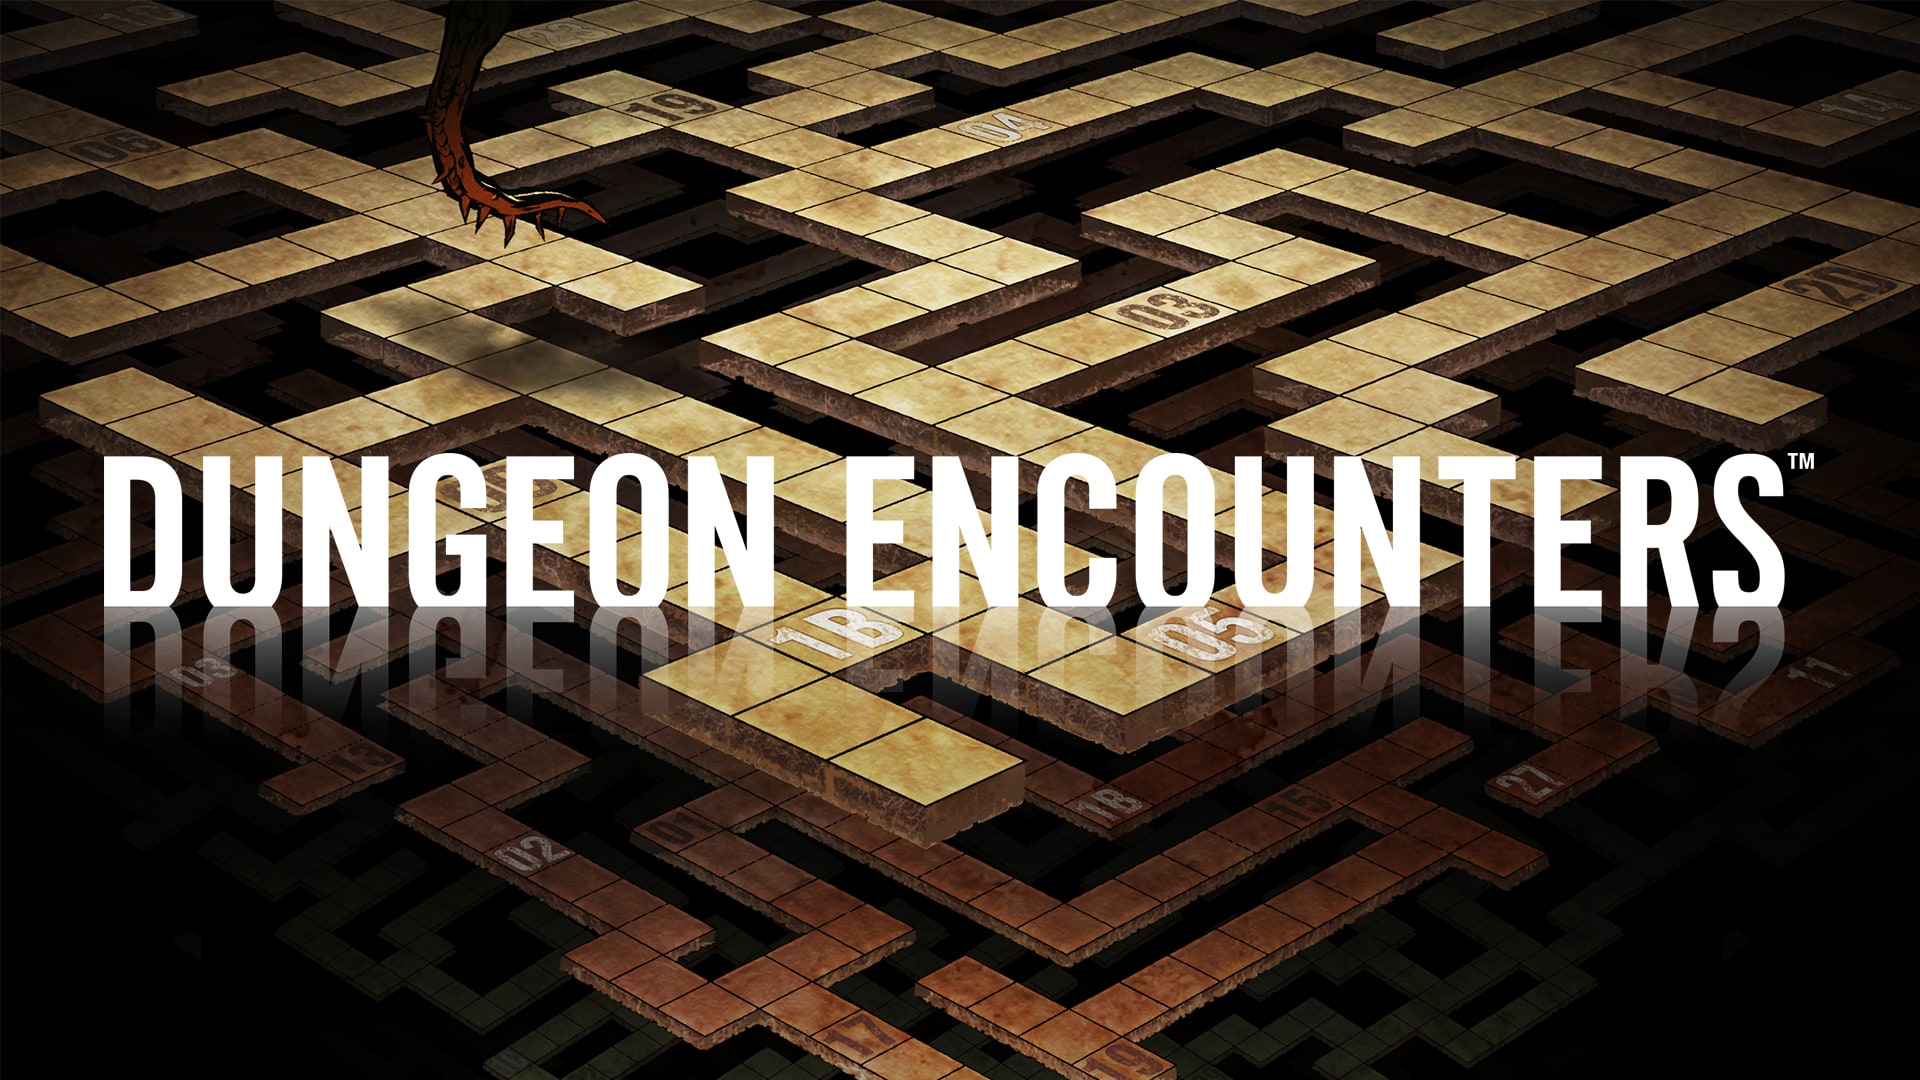 DUNGEON ENCOUNTERS